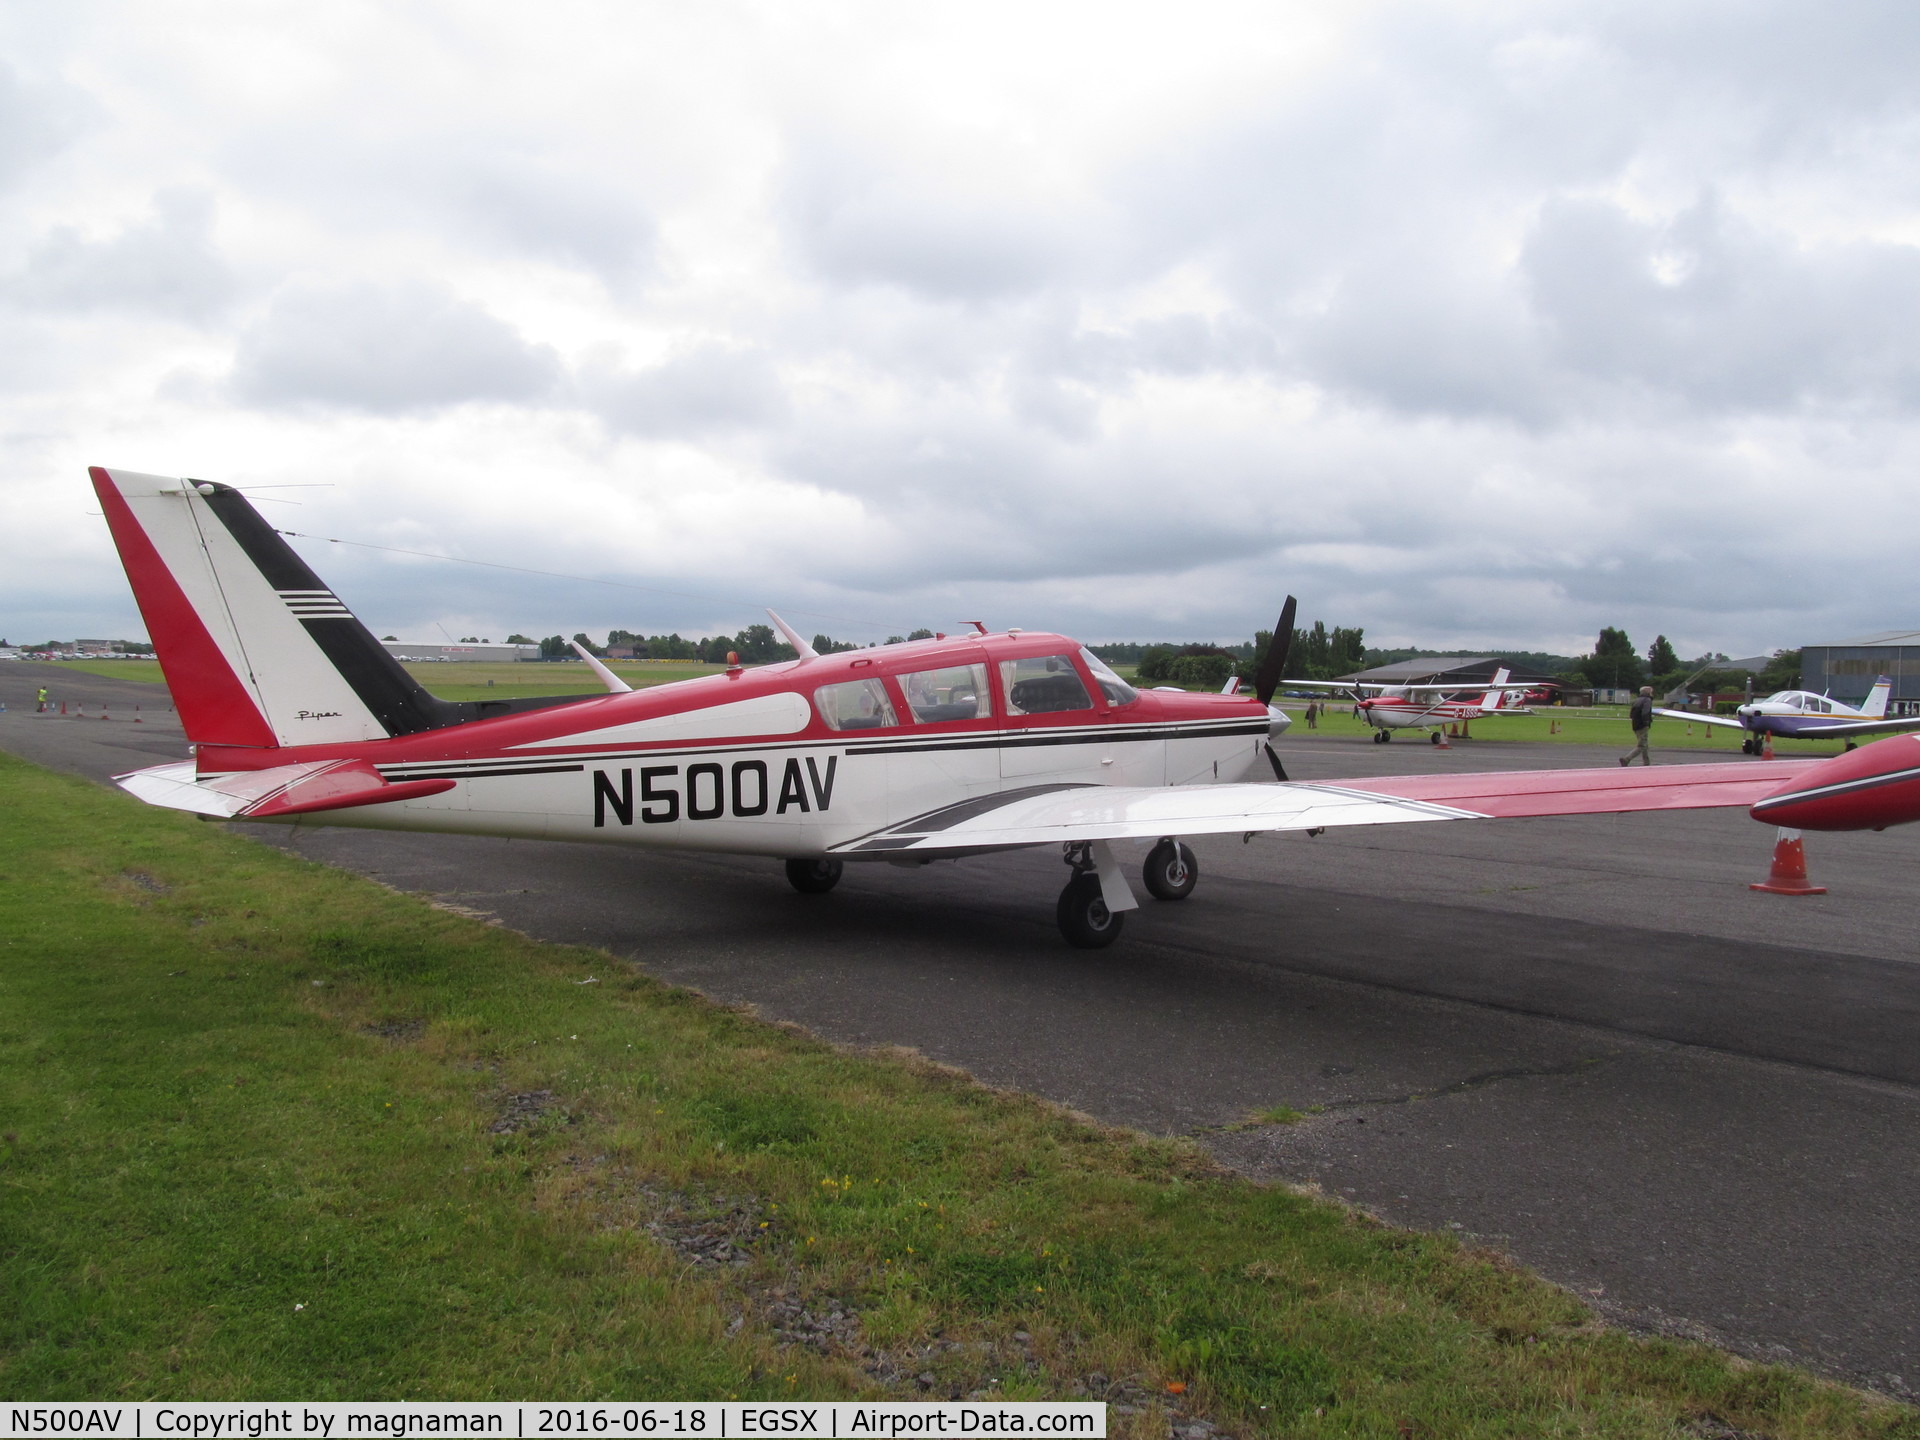 N500AV, 1969 Piper PA-24-260 Comanche C/N 24-4805, at NW fly in